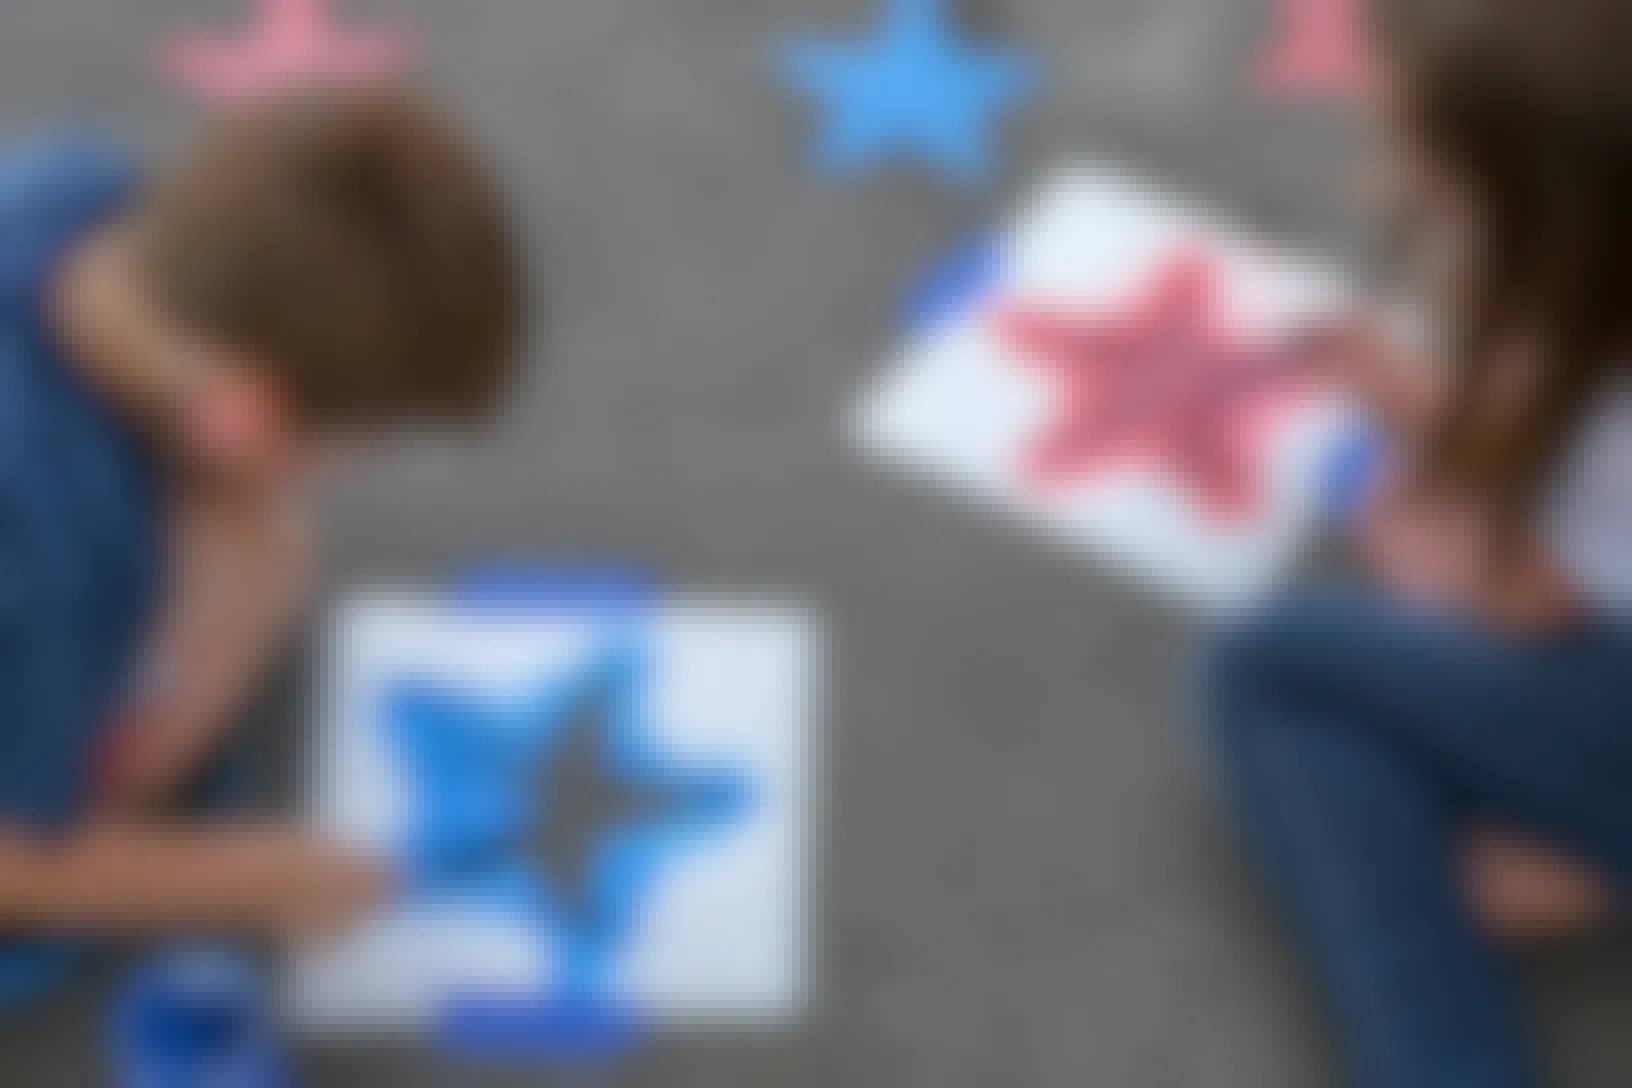 Two children using star-shaped stencils and sidewalk chalk paint to paint red and blue stars onto a driveway.